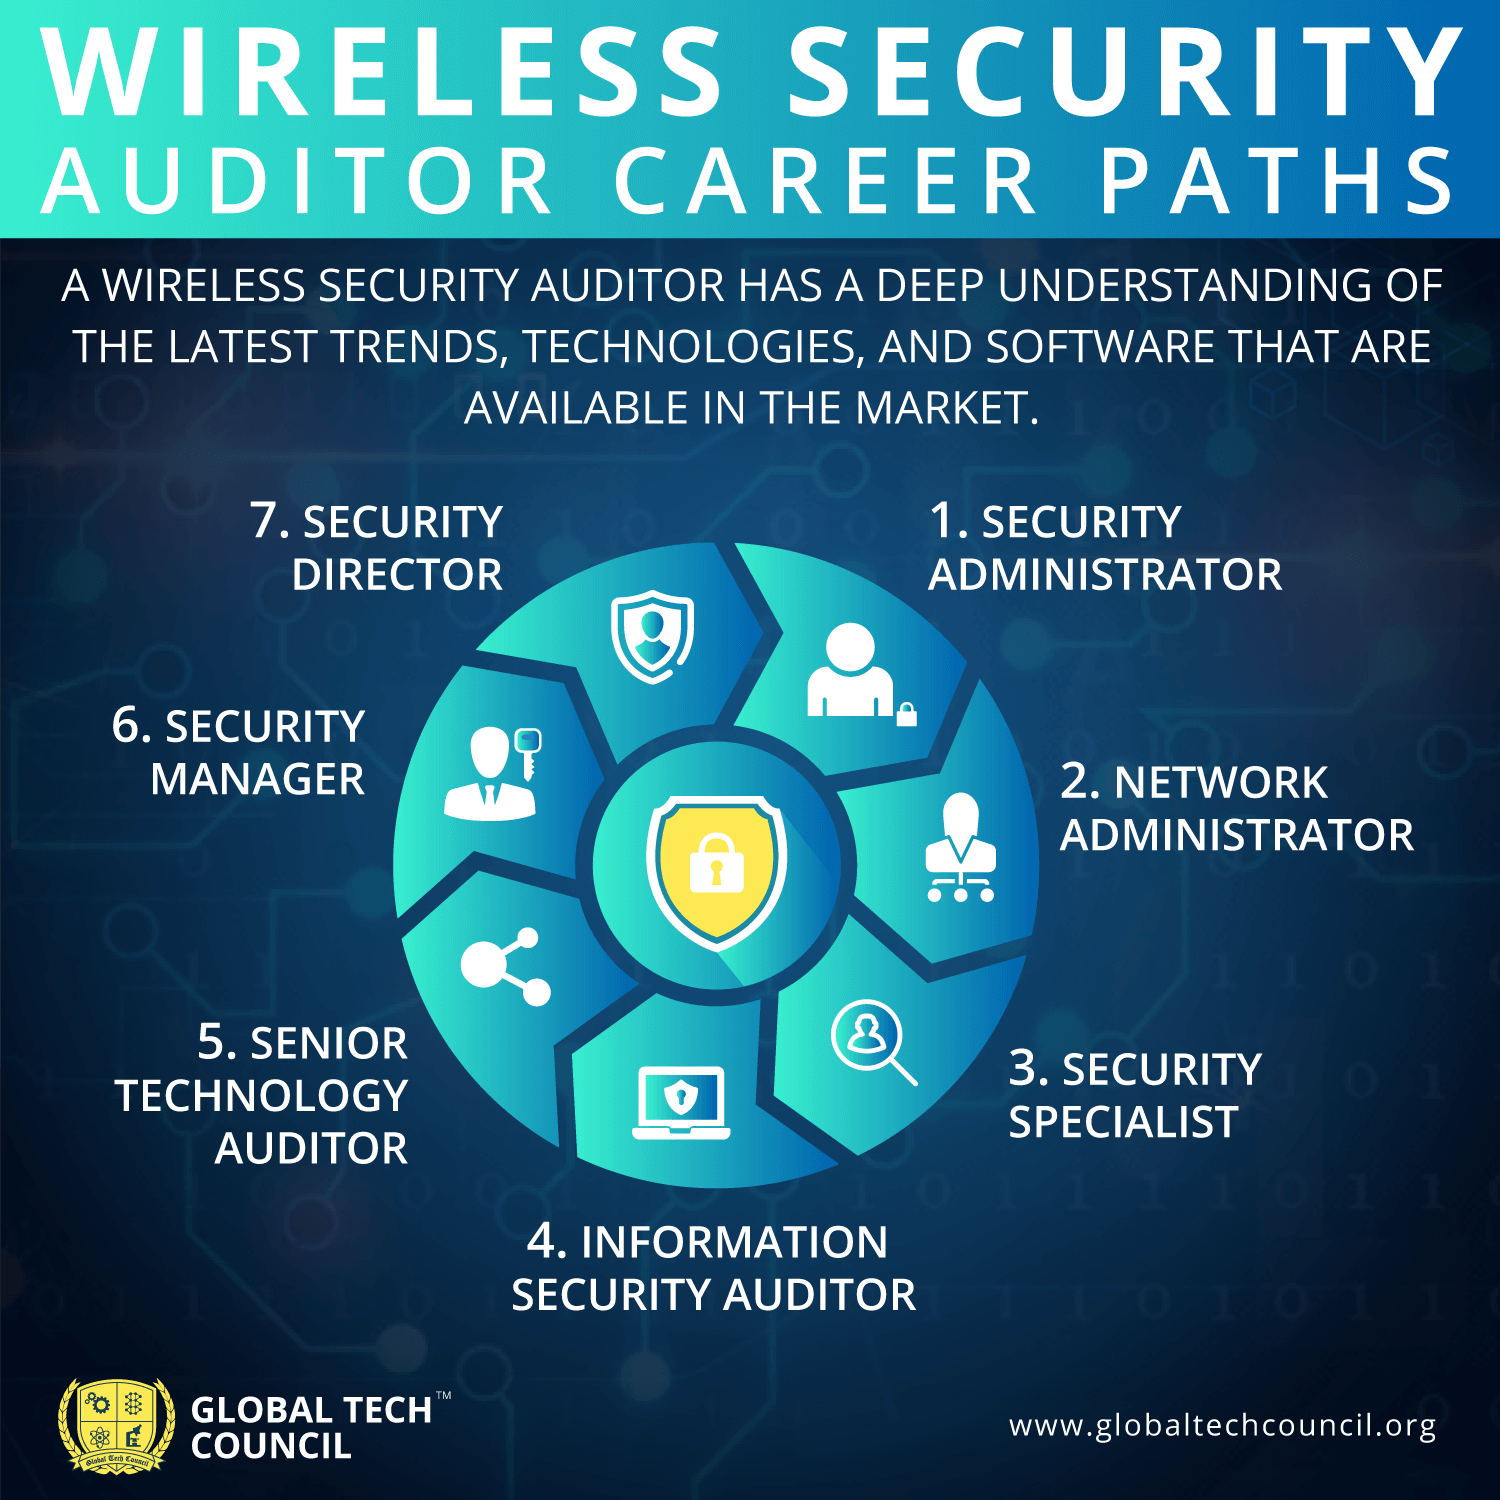 Wireless-Security-Auditor-Career-Paths